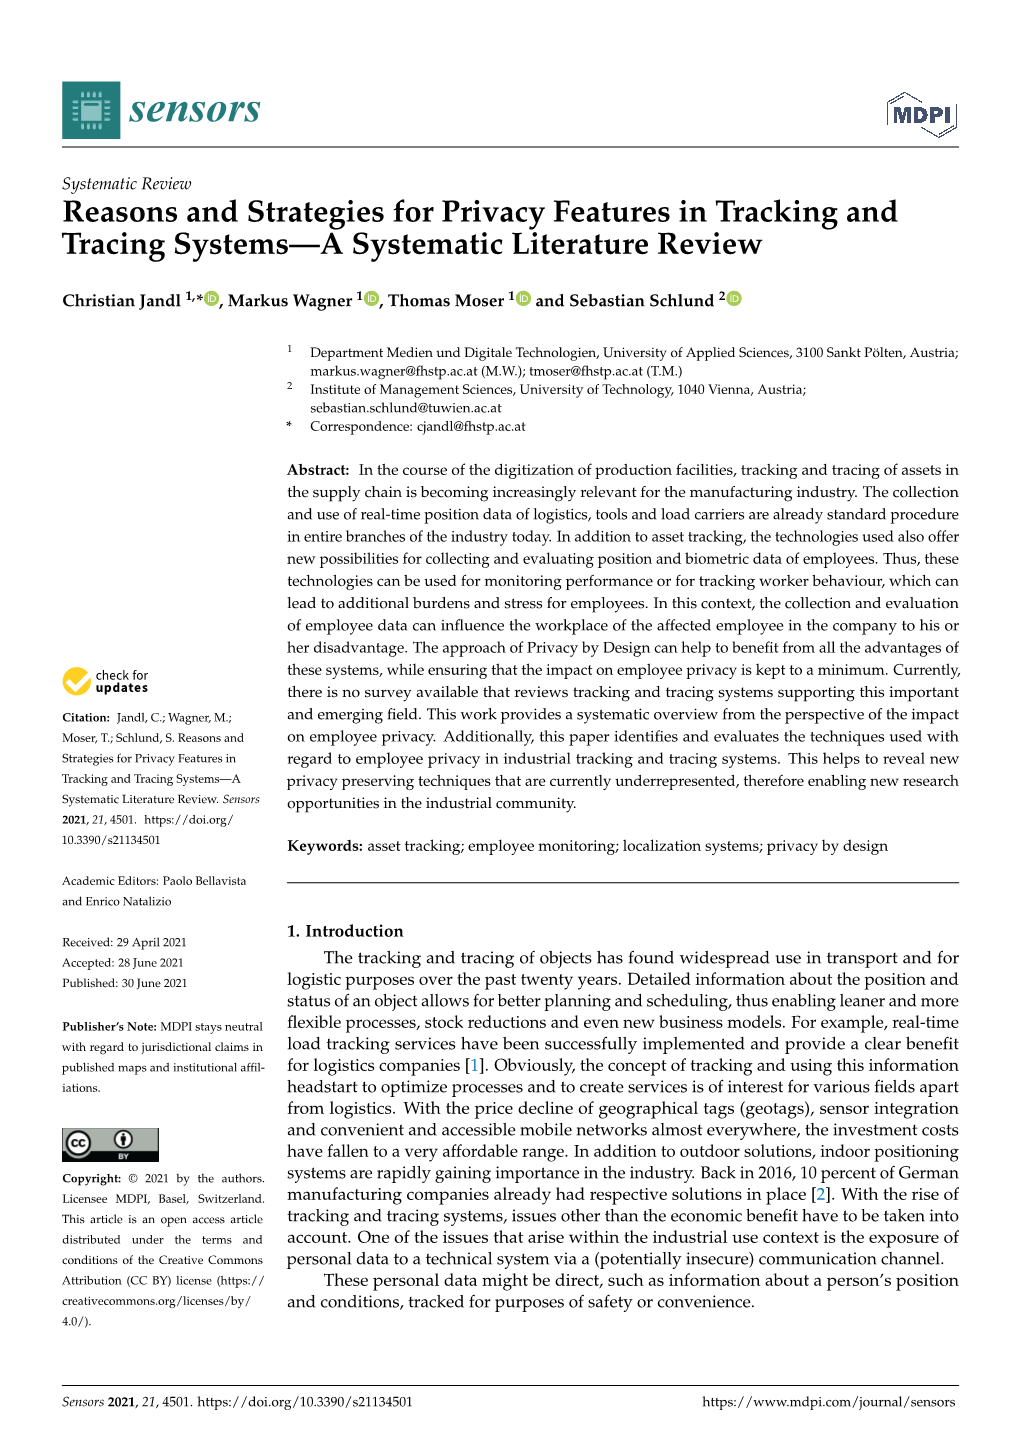 Reasons and Strategies for Privacy Features in Tracking and Tracing Systems—A Systematic Literature Review